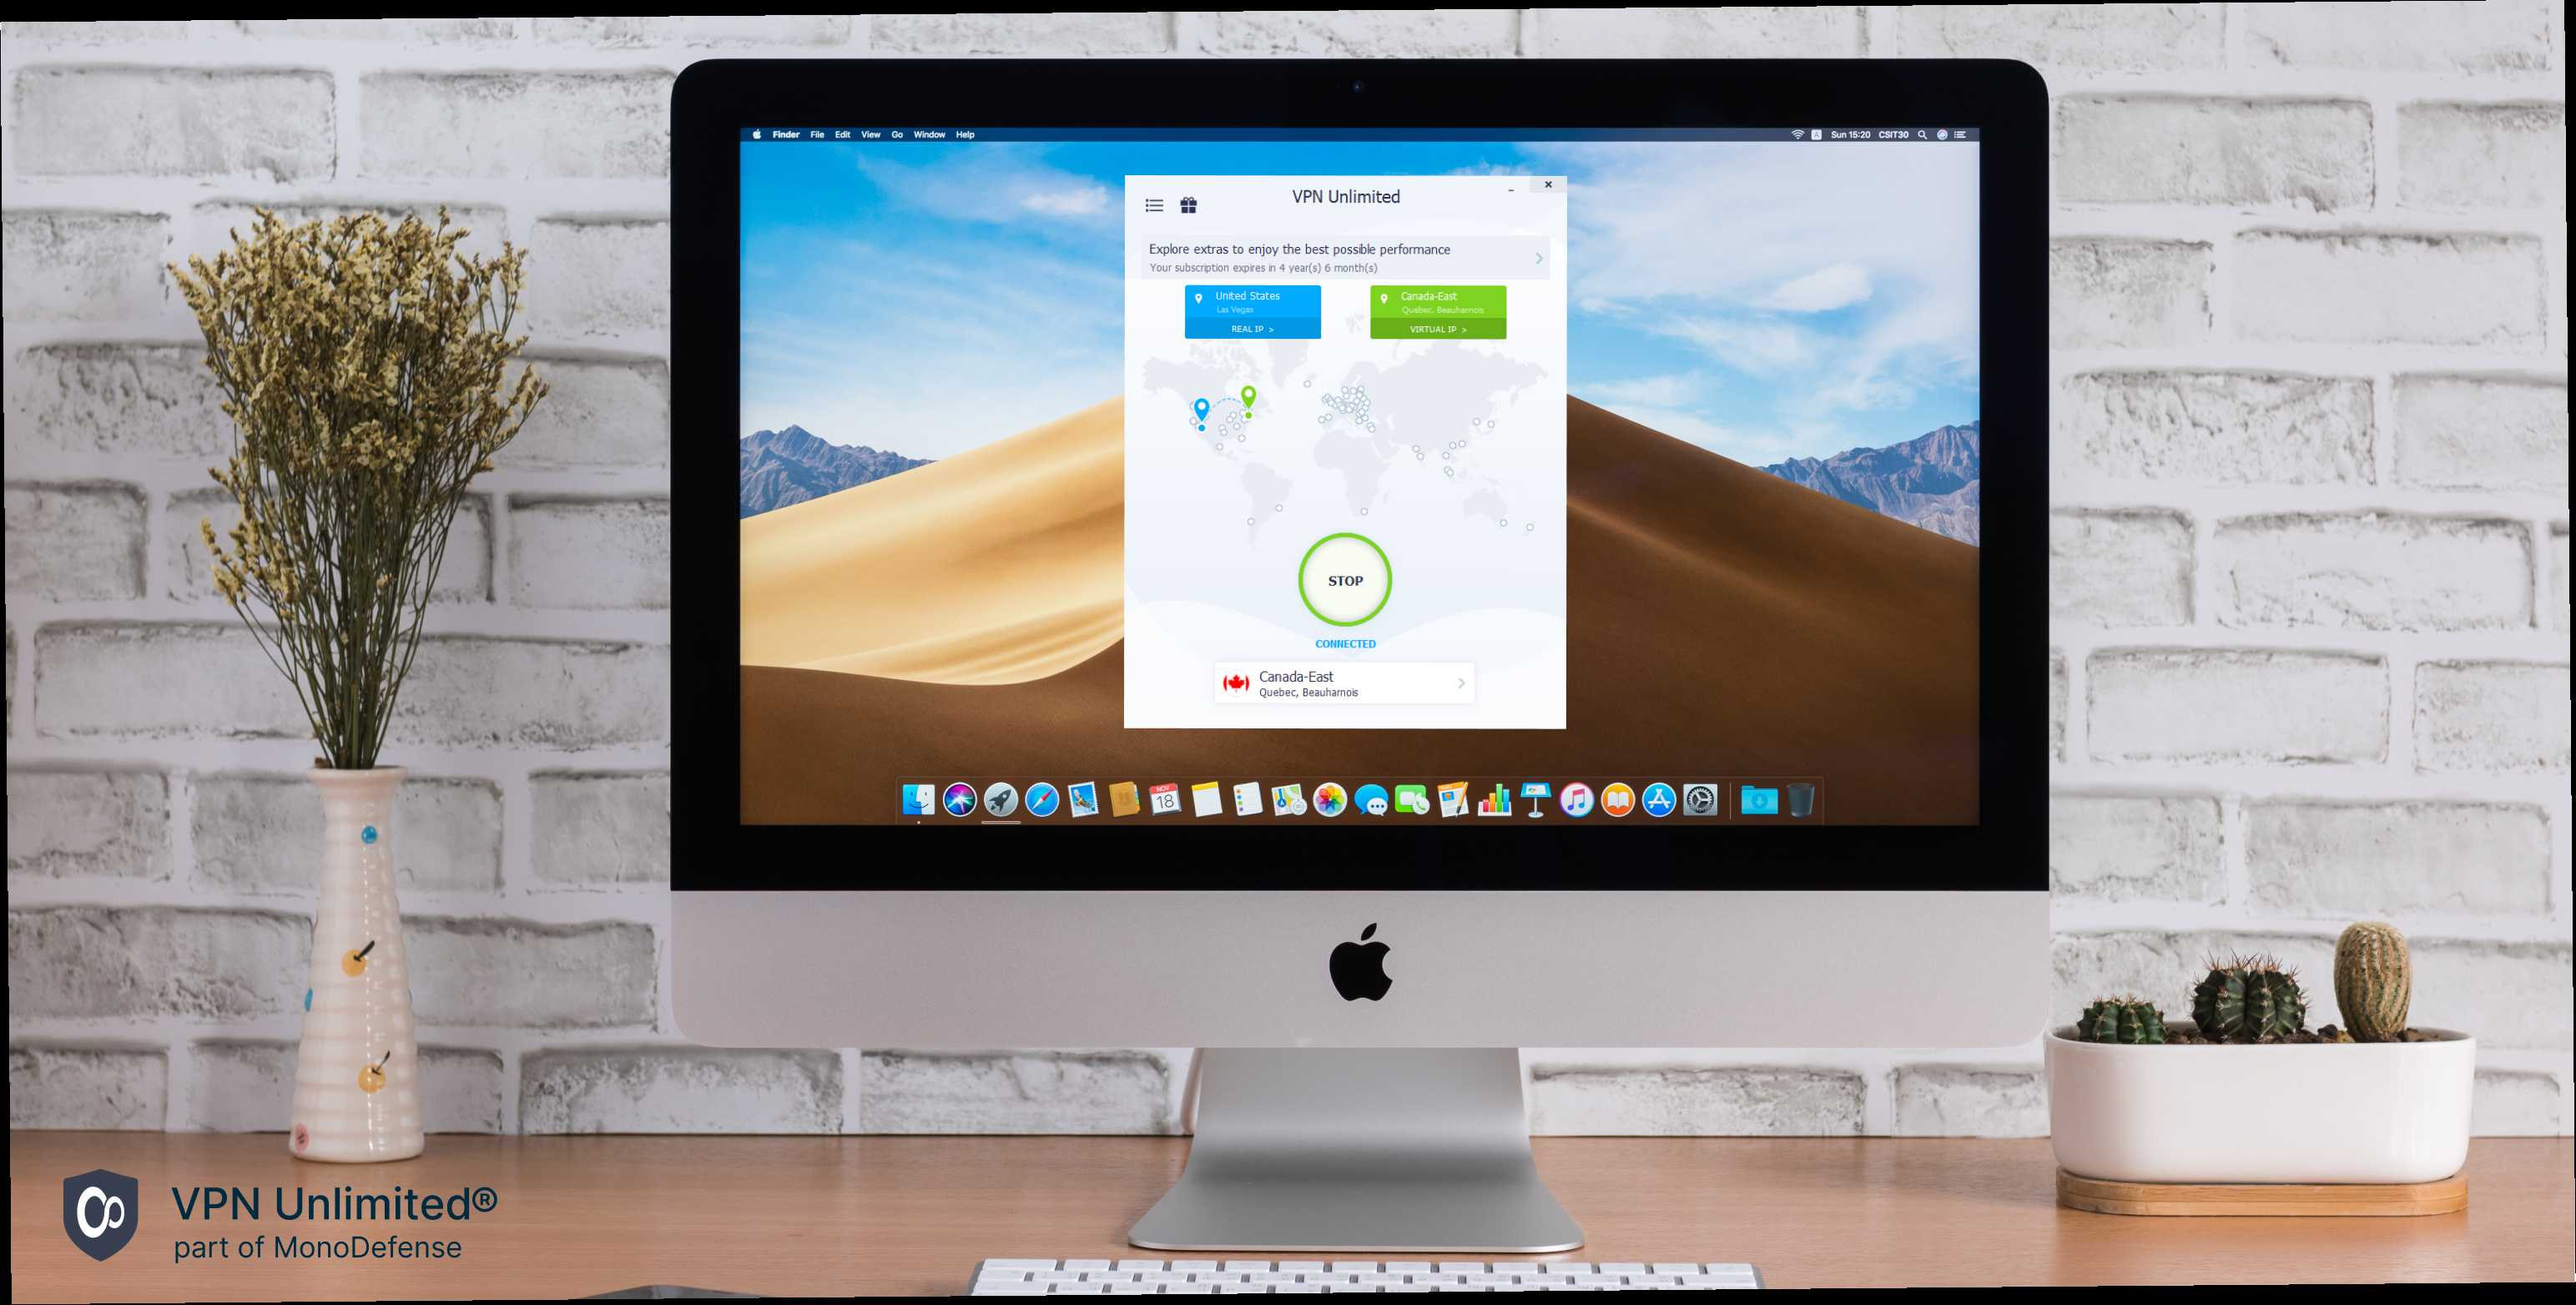 VPN Unlimited application Hide your real IP address and get the IP of another country.